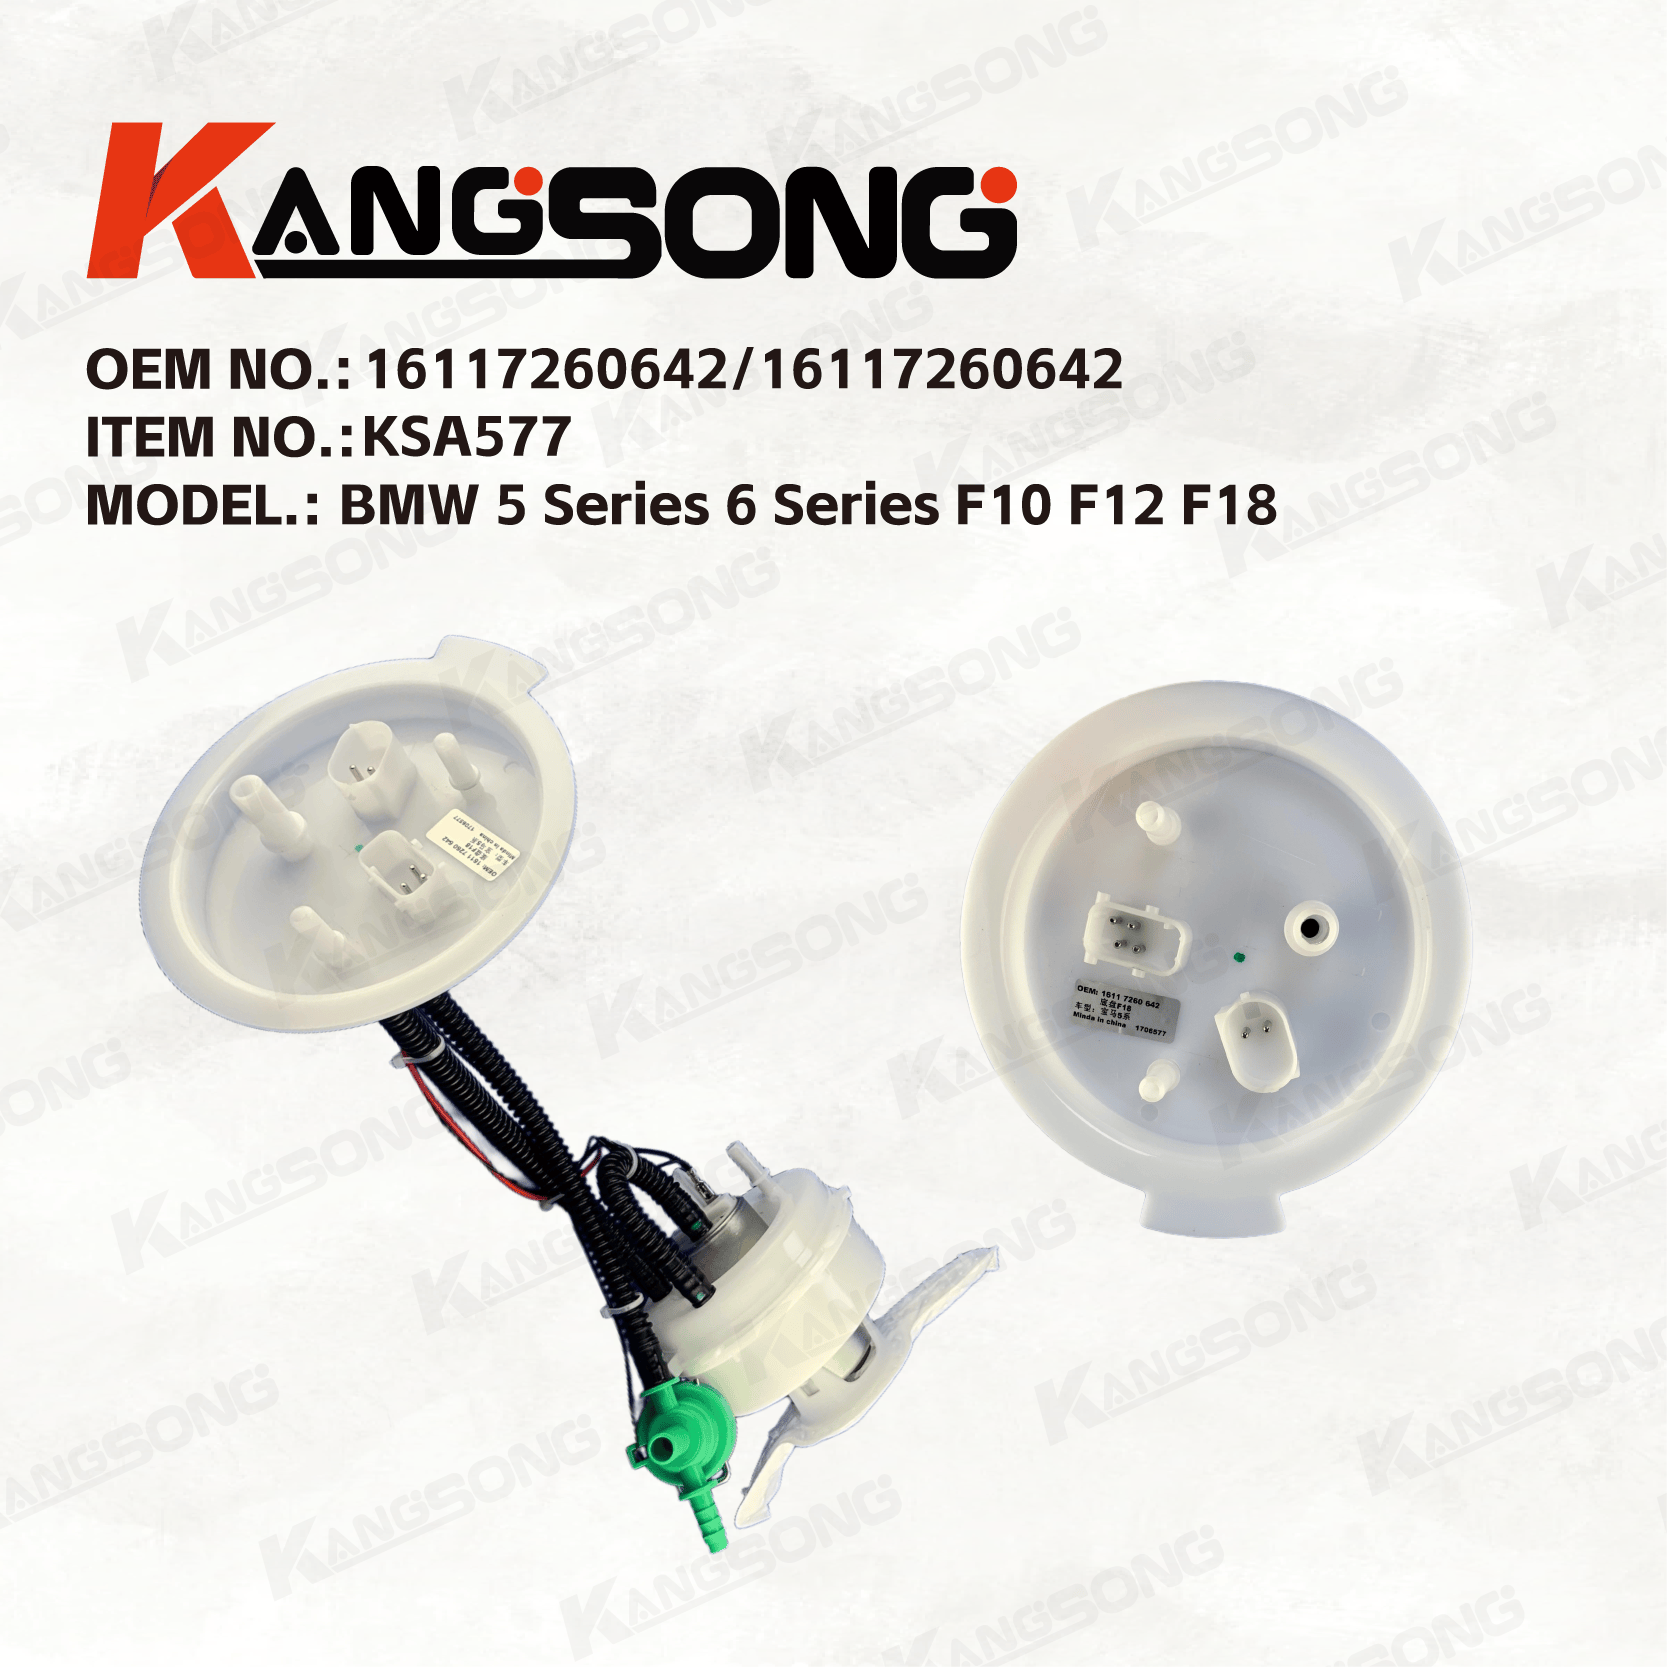 Applicable to BMW 5 Series 6 Series F10 F12 F18/16117260642 16117260642 09753109907/Fuel Pump Assembly/KS-A577